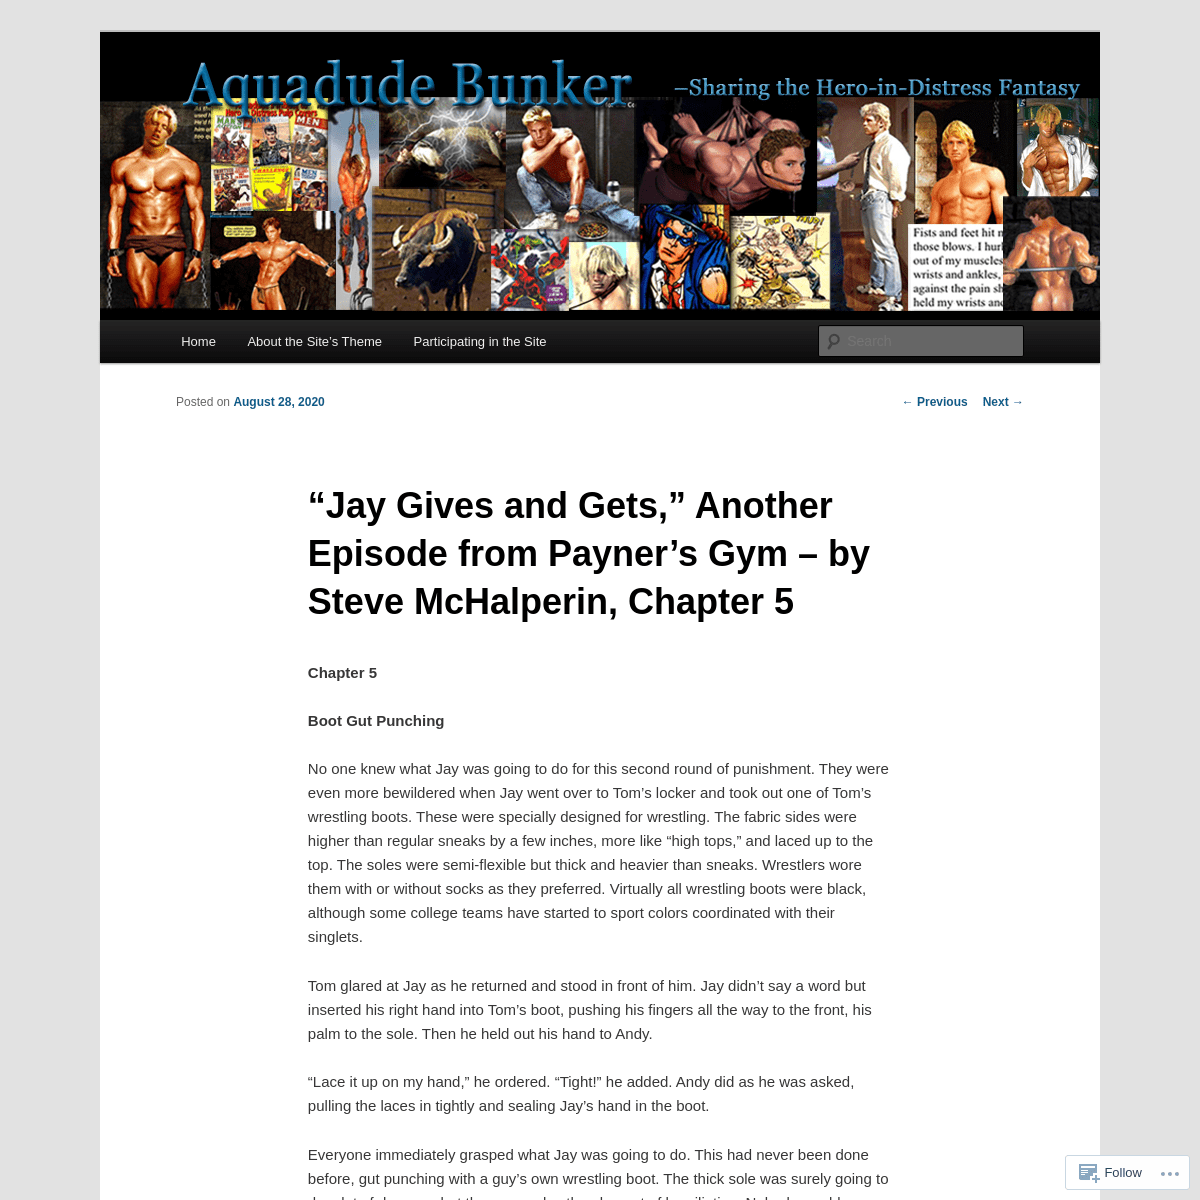 A complete backup of https://aquadude2001.wordpress.com/2020/08/28/jay-gives-and-gets-another-episode-from-payners-gym-by-steve-